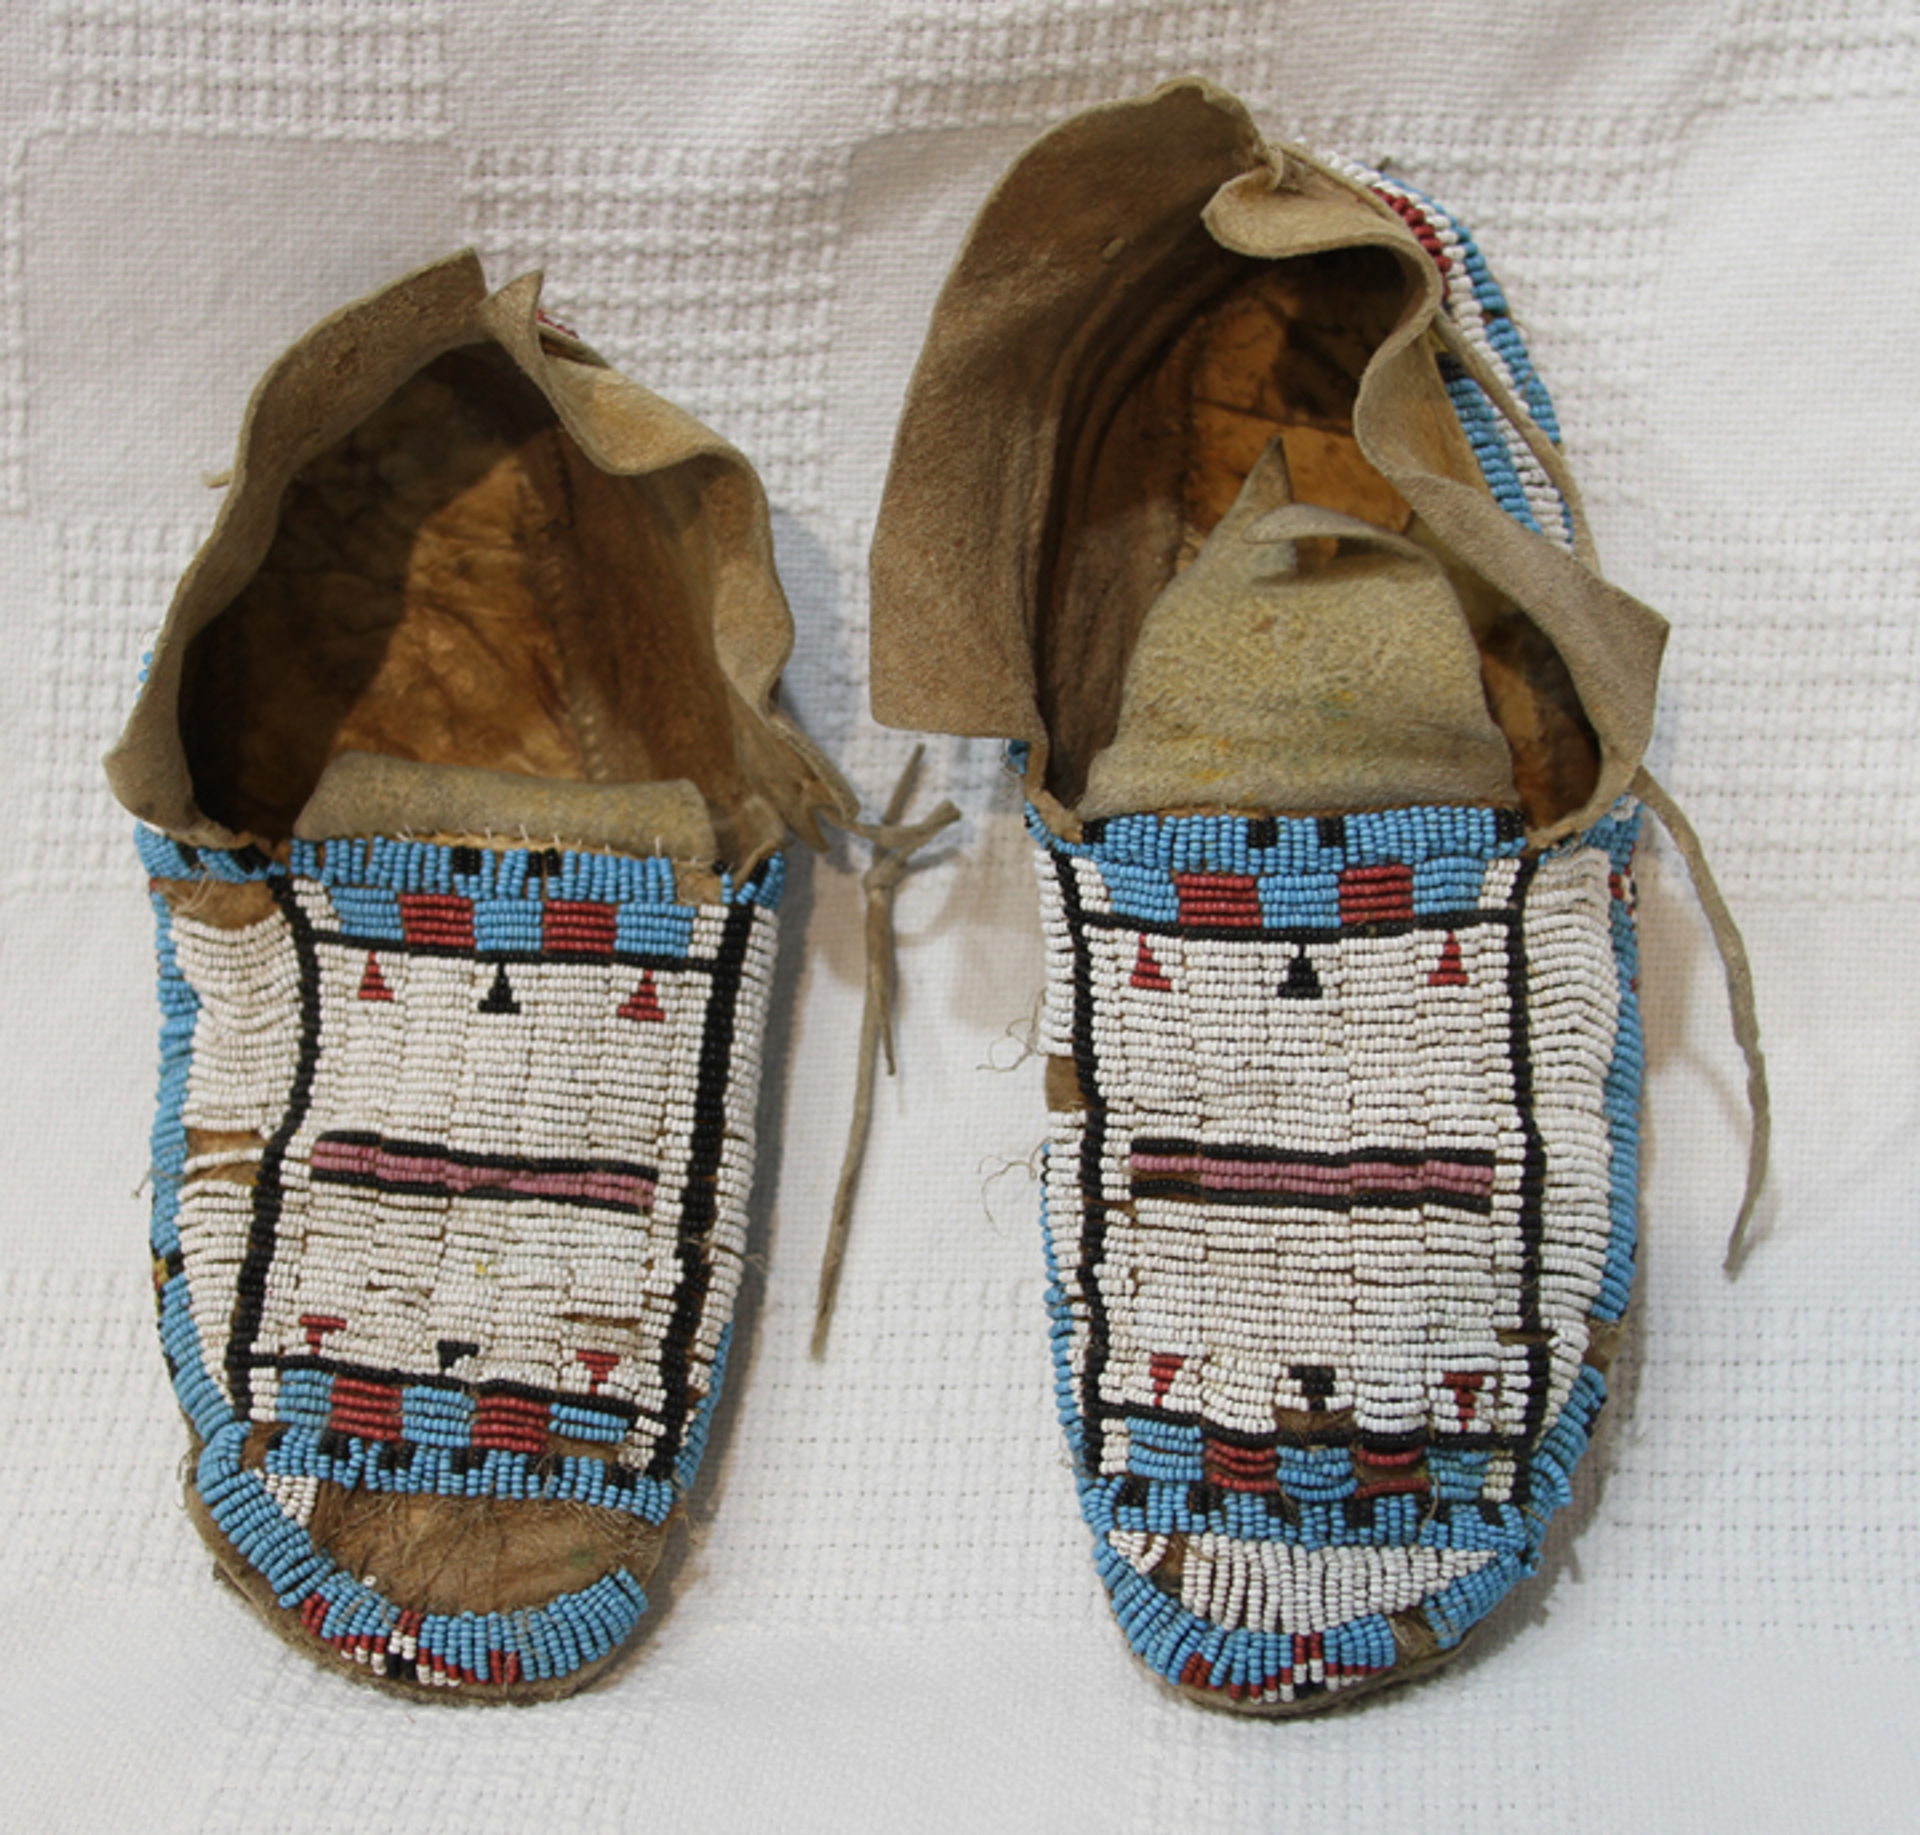 Beaded Moccasins by Native American Beadwork